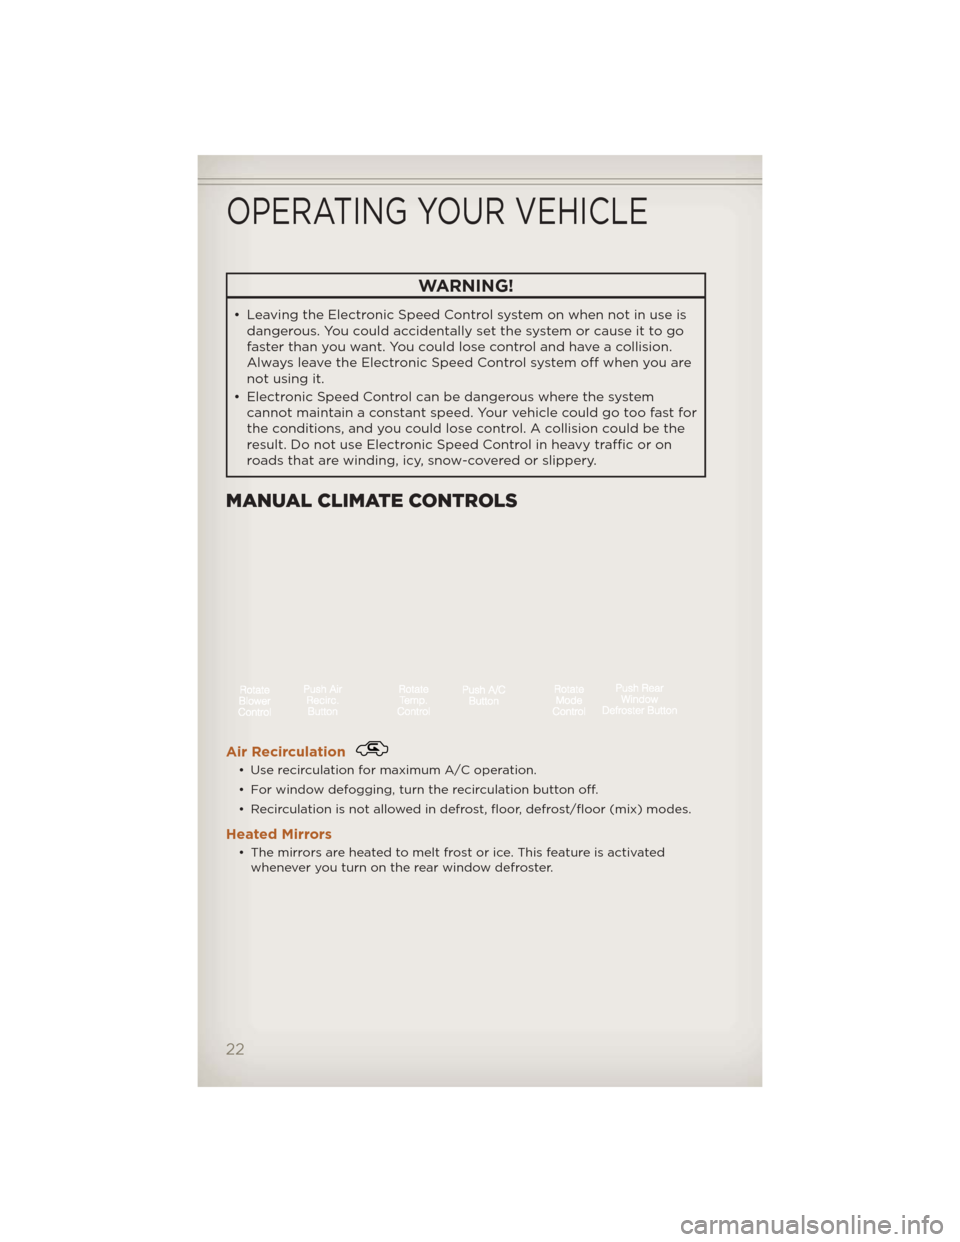 JEEP LIBERTY 2012 KK / 2.G User Guide WARNING!
• Leaving the Electronic Speed Control system on when not in use isdangerous. You could accidentally set the system or cause it to go
faster than you want. You could lose control and have a